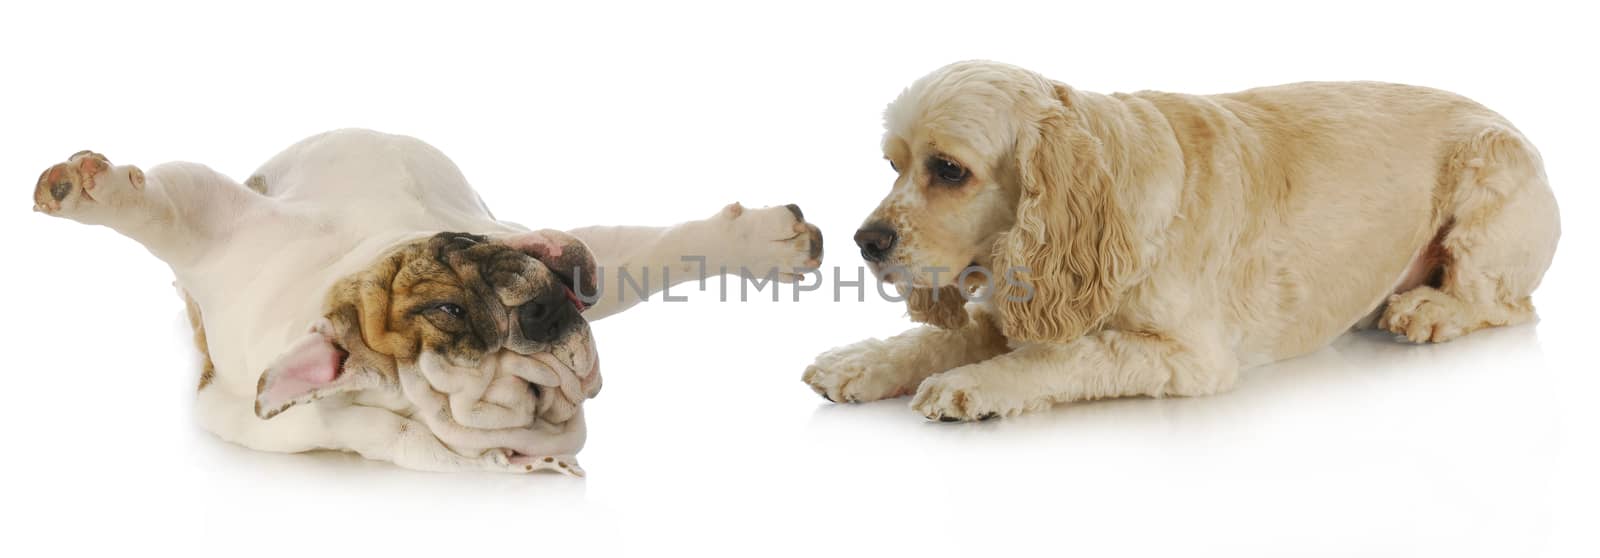 dogs playing - cocker spaniel and english bulldog laying on ground playing with reflection on white background